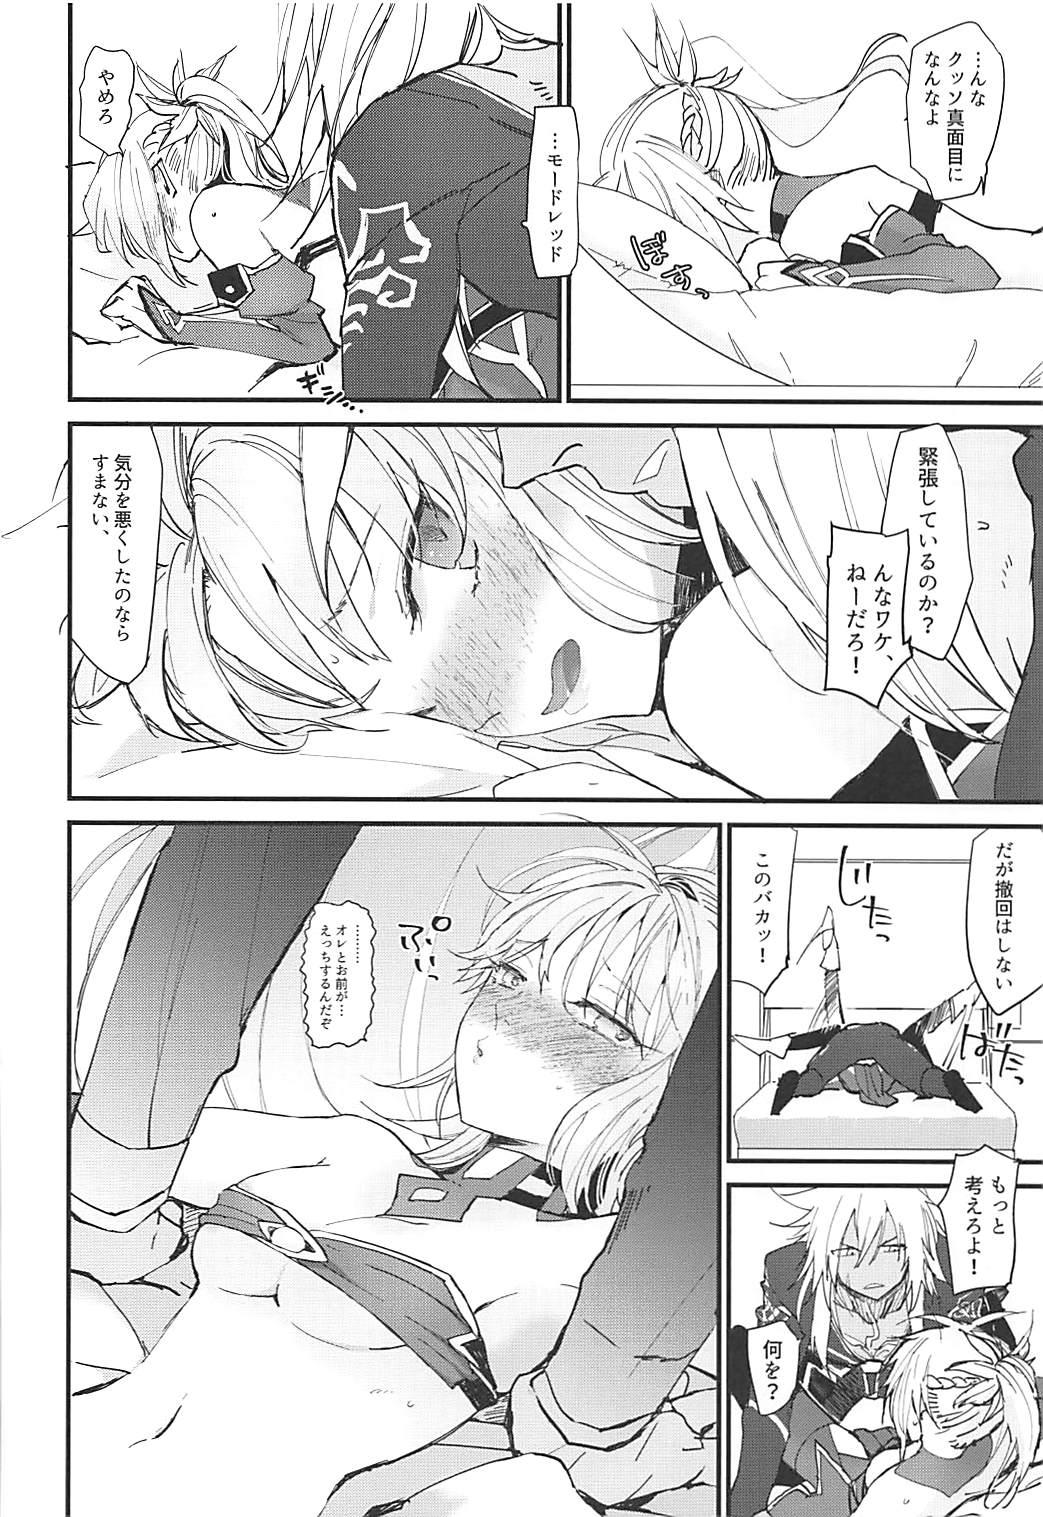 Jerk Off Instruction THE WARRIORS' REST - Fate grand order Sex - Page 8